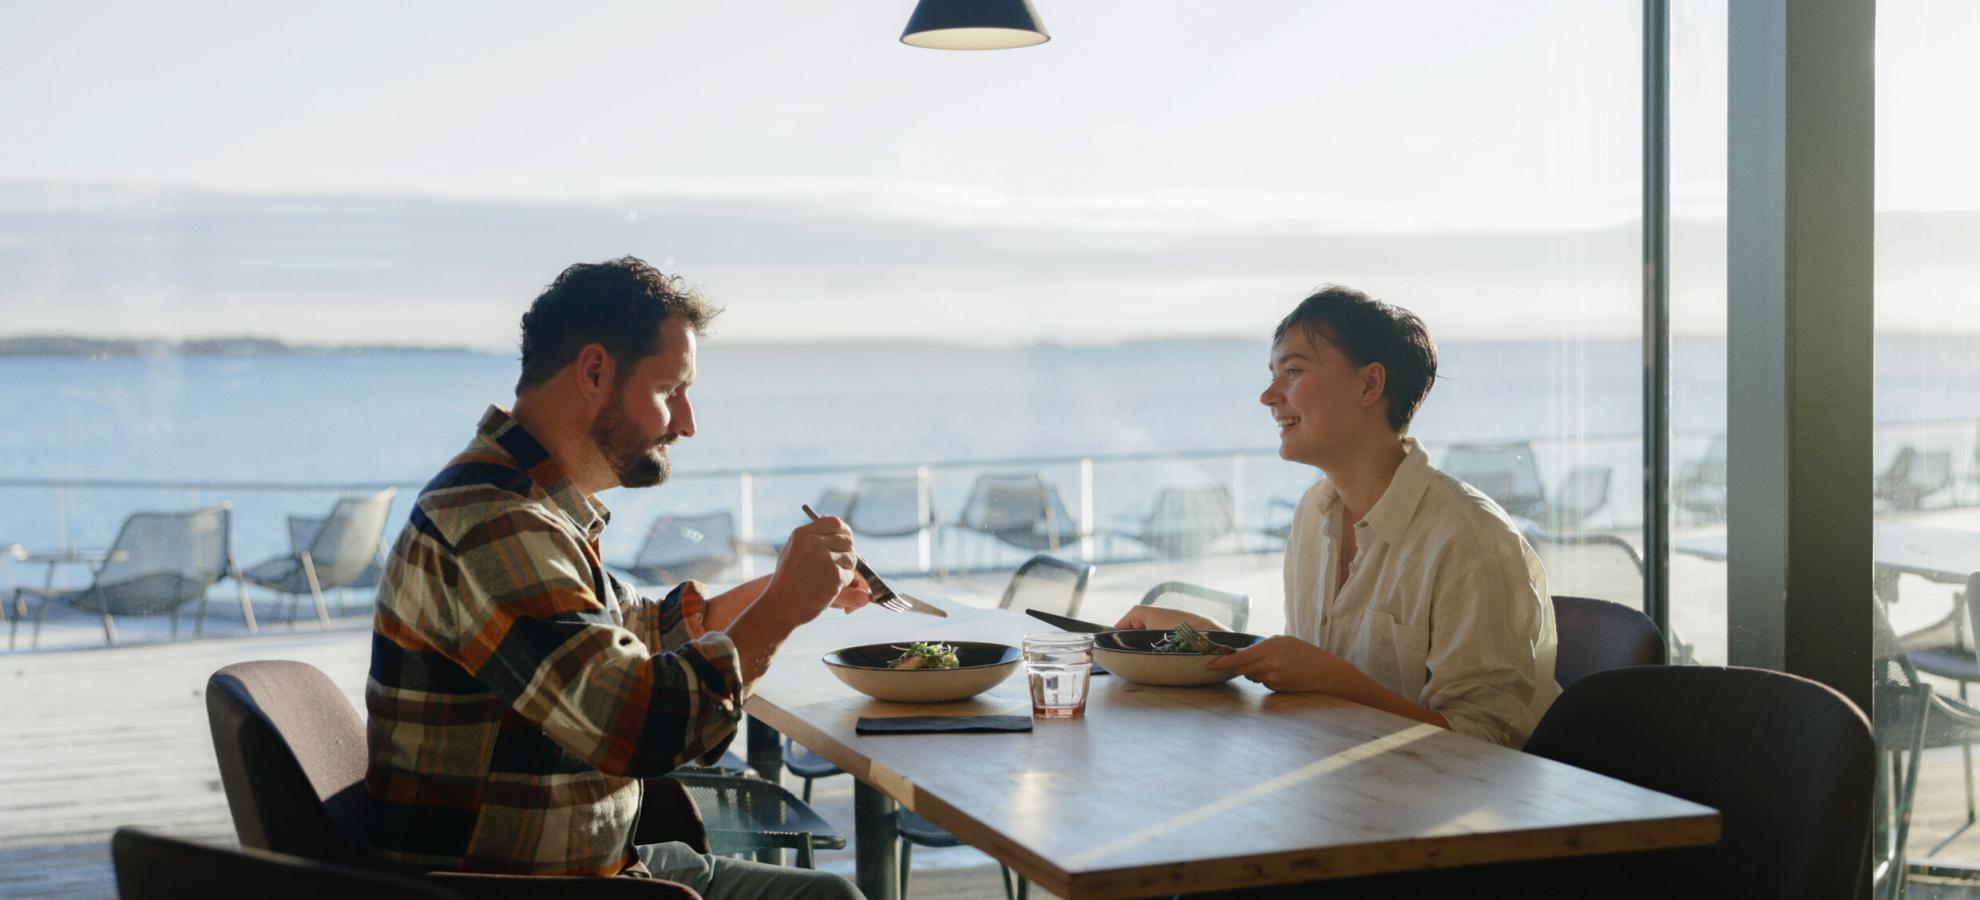 A couple eating at a table, seaview on the background